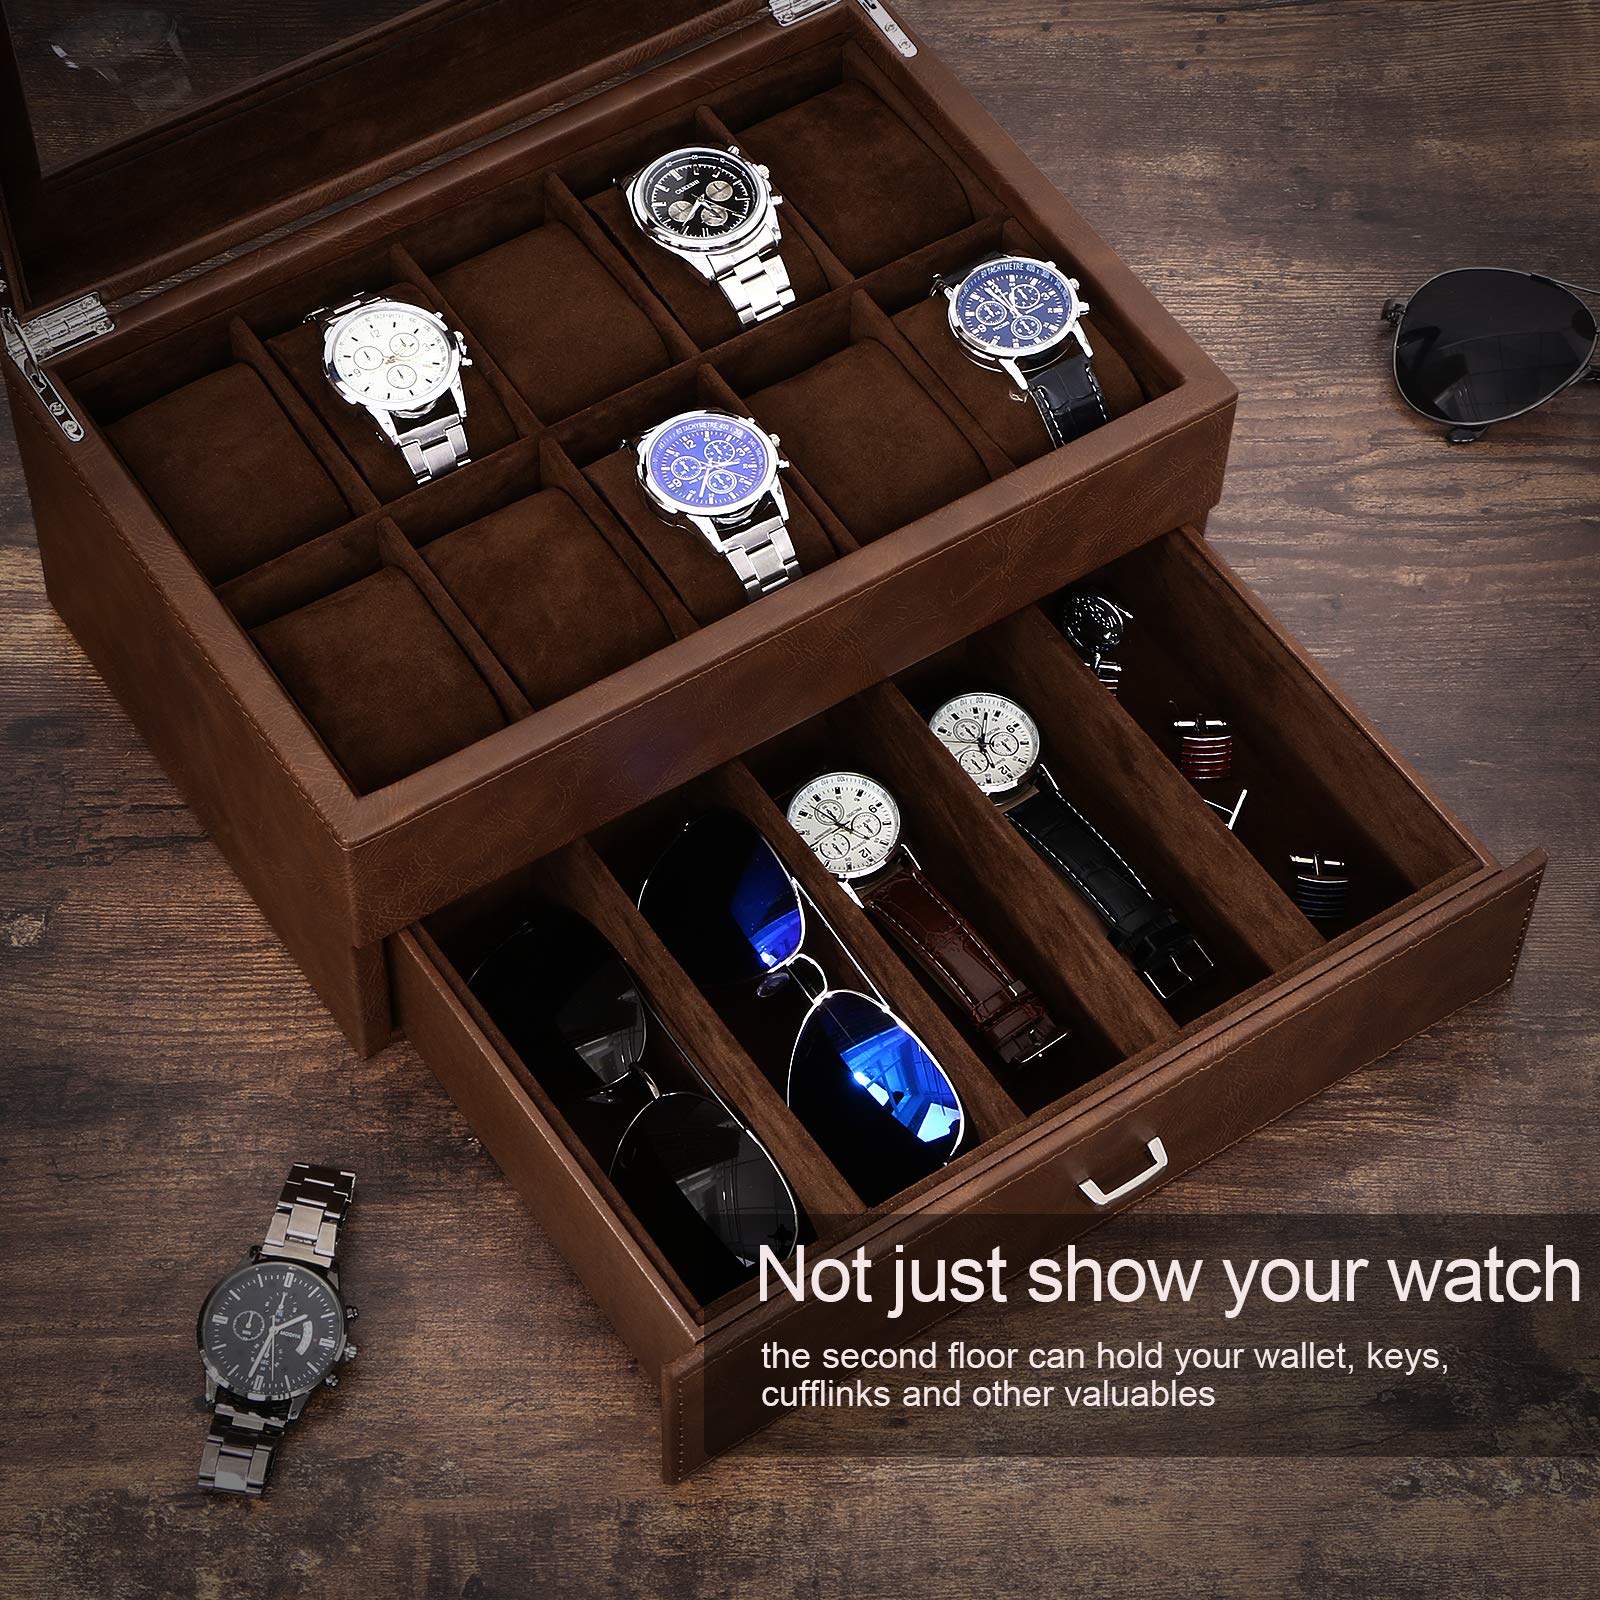 BEWISHOME 6 Watch Case and 3 Slots Sunglasses Box for Men & 10 Slots Watch Organizer for Men with Drawer,Bundle